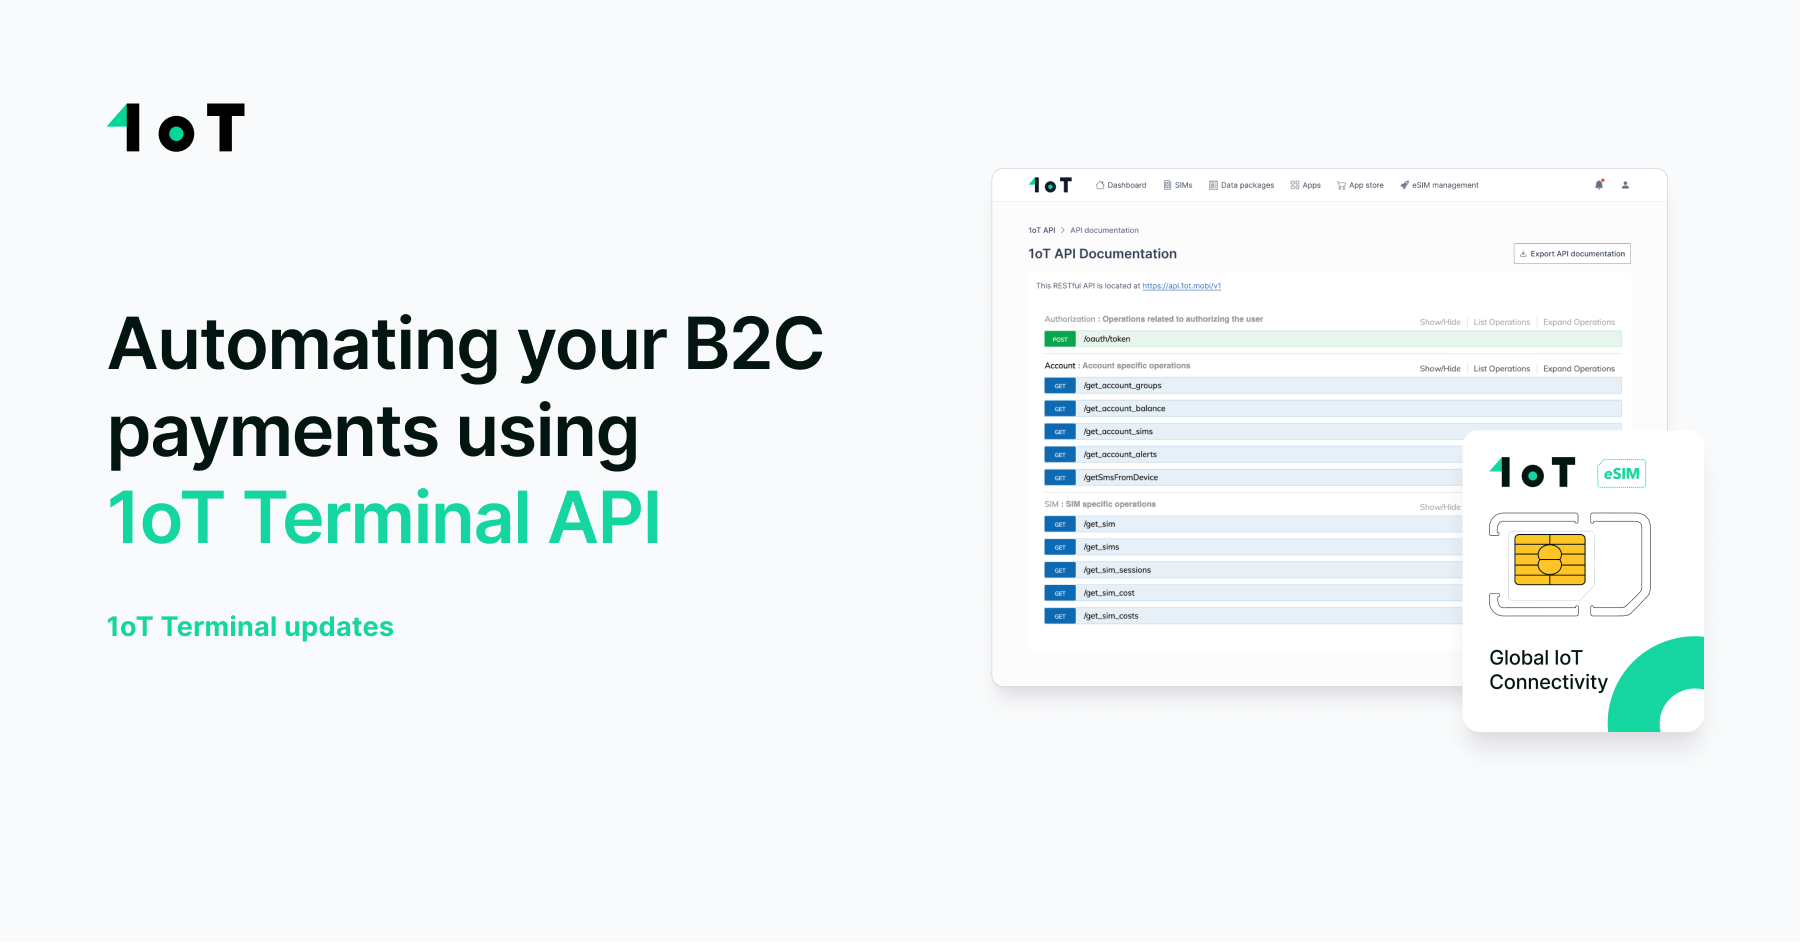 Article cover image for Automating your B2C payments using 1oT Terminal API